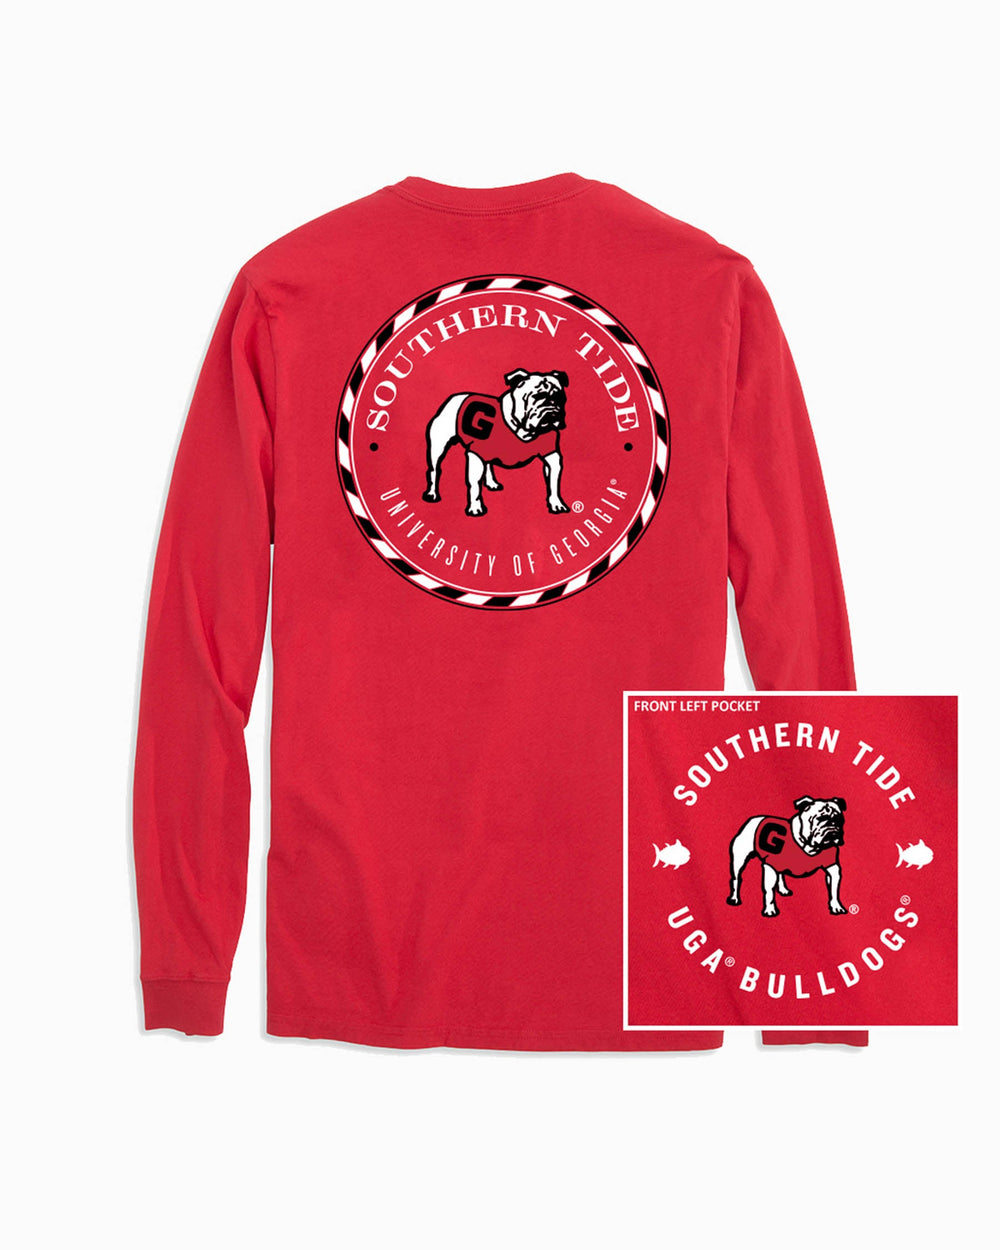 The front and back of the Georgia Bulldogs Long Sleeve Medallion Logo T-Shirt by Southern tide - Varsity Red